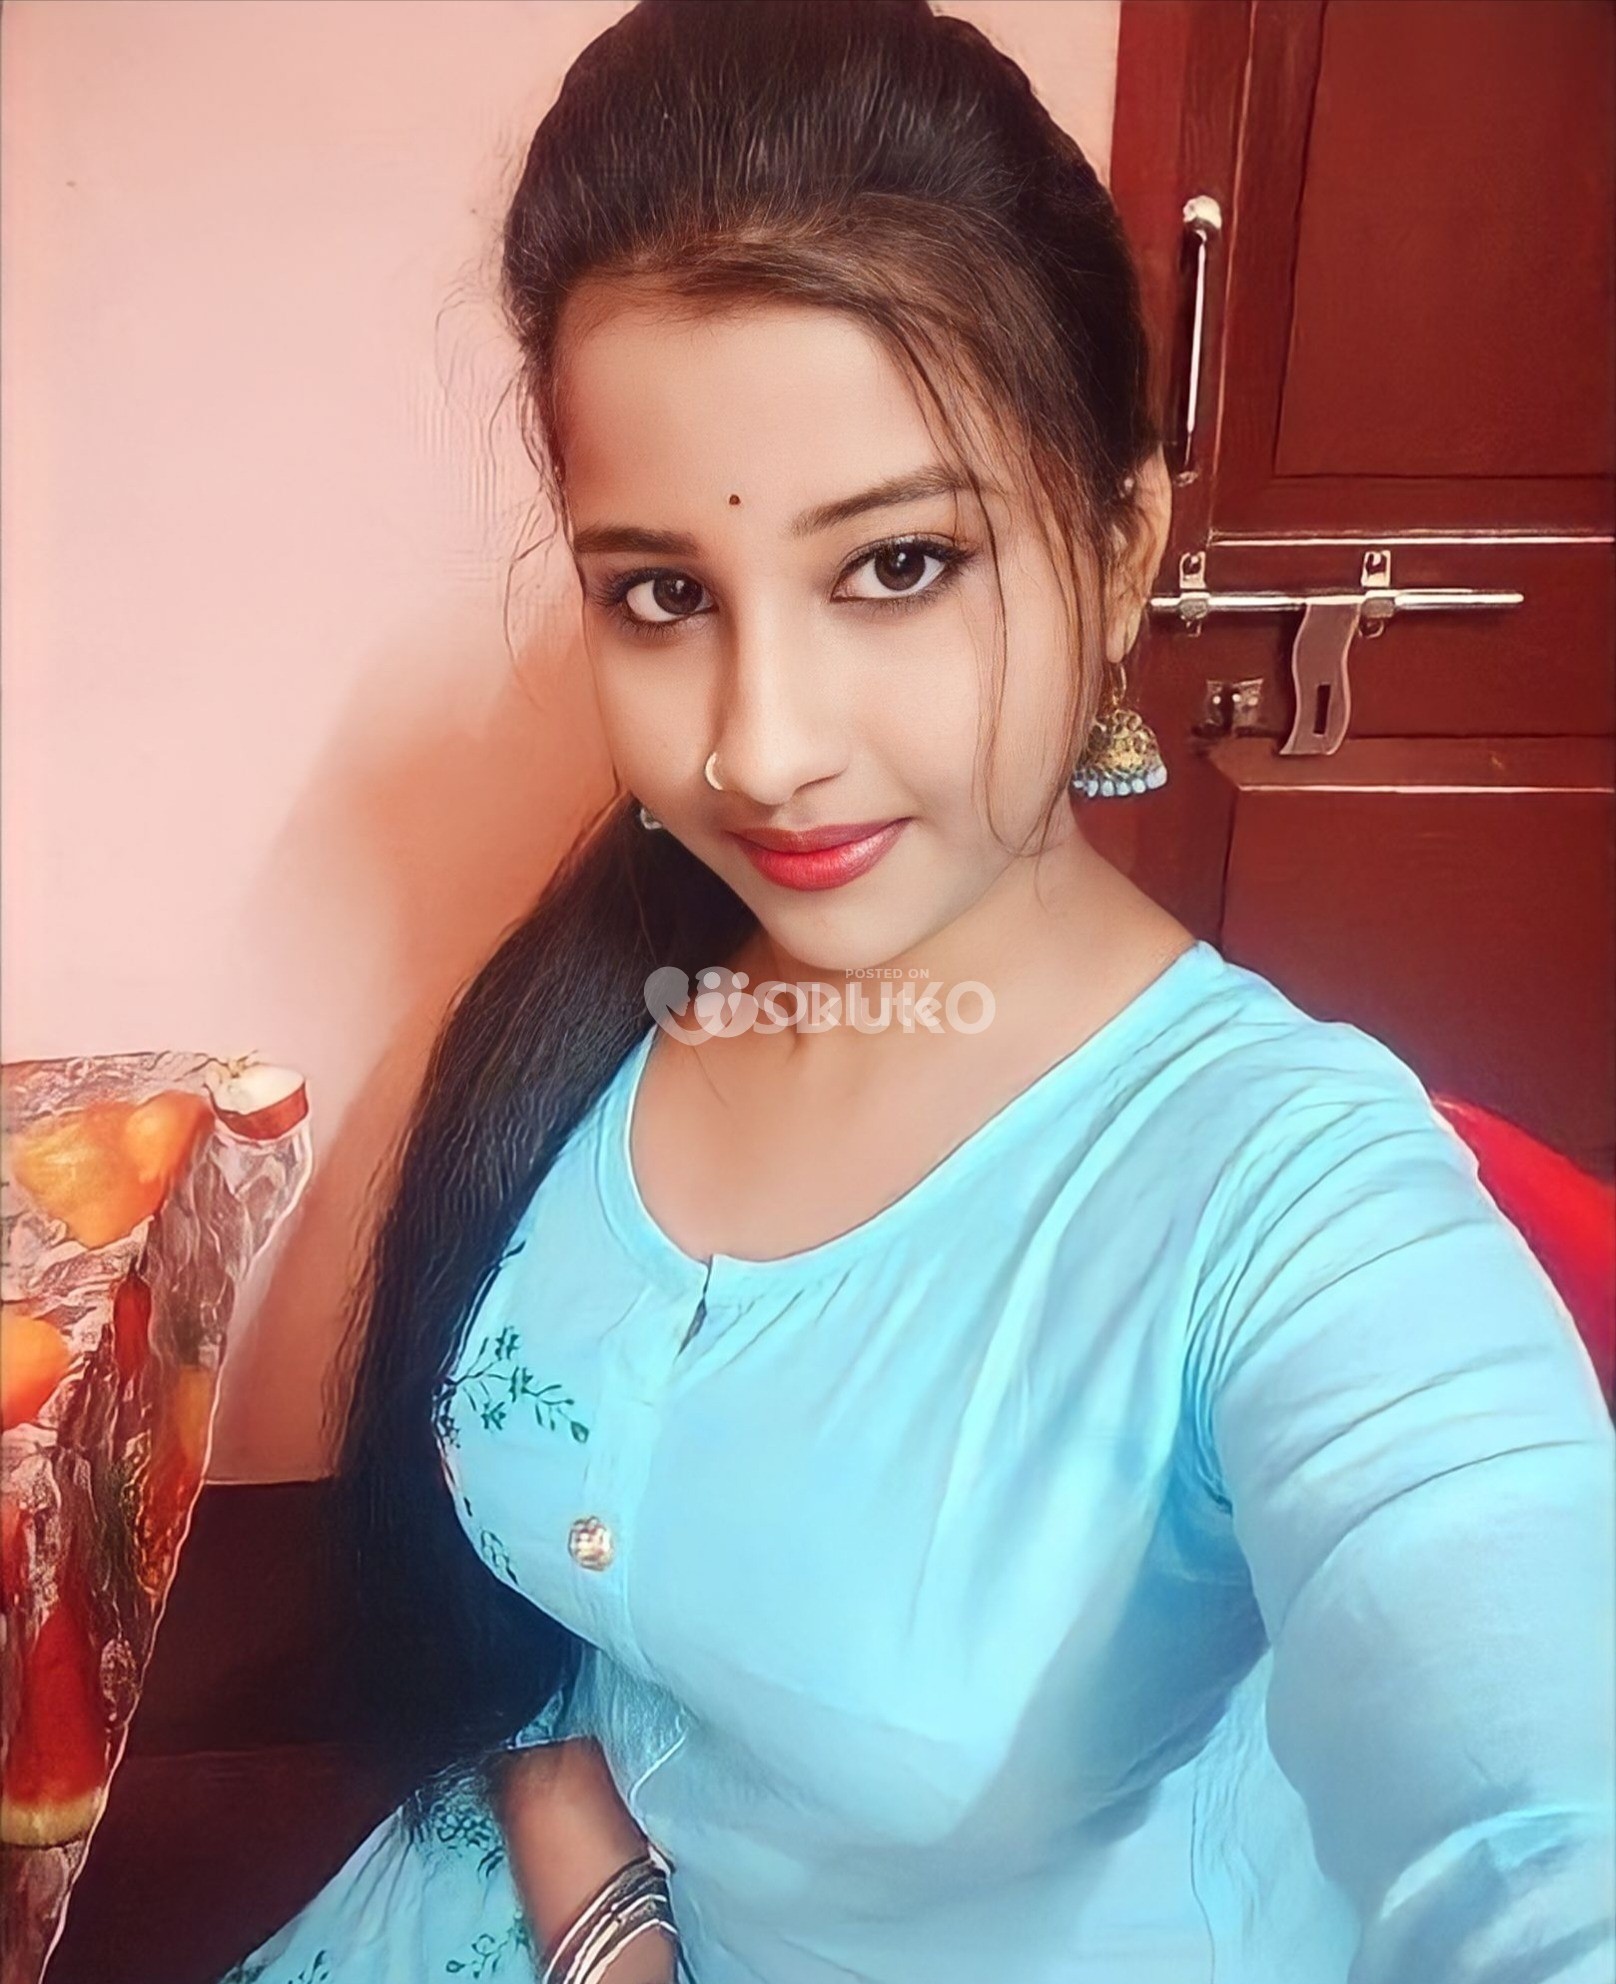 CHENNAI BEST GENUINE DOORSTEP INCALL GIRL SERVICE LOW PRICES FULL SAFE SECURE